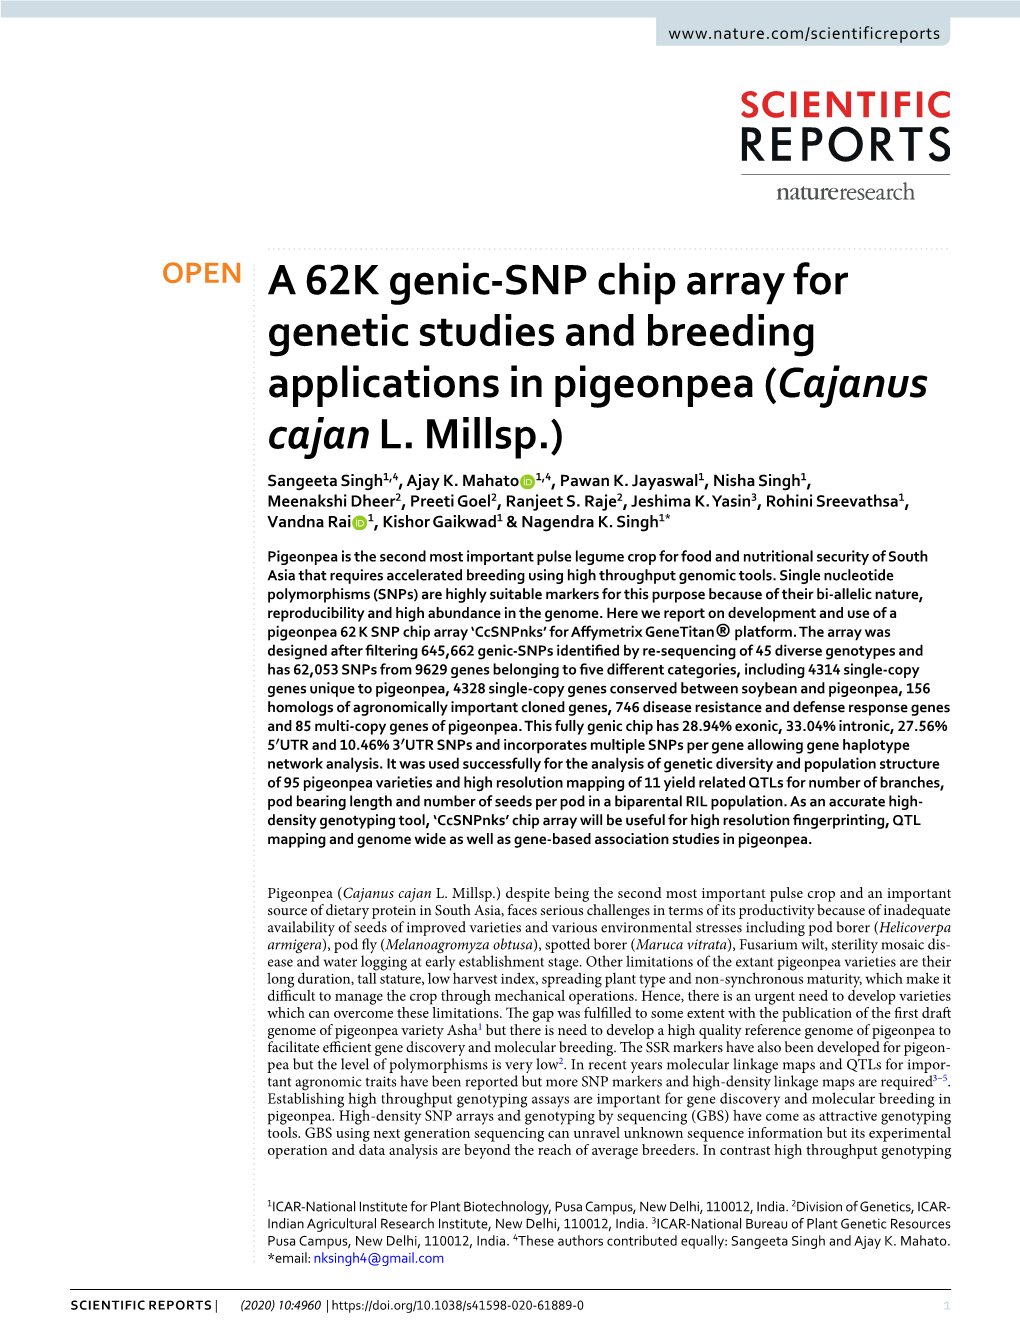 A 62K Genic-SNP Chip Array for Genetic Studies and Breeding Applications in Pigeonpea (Cajanus Cajan L